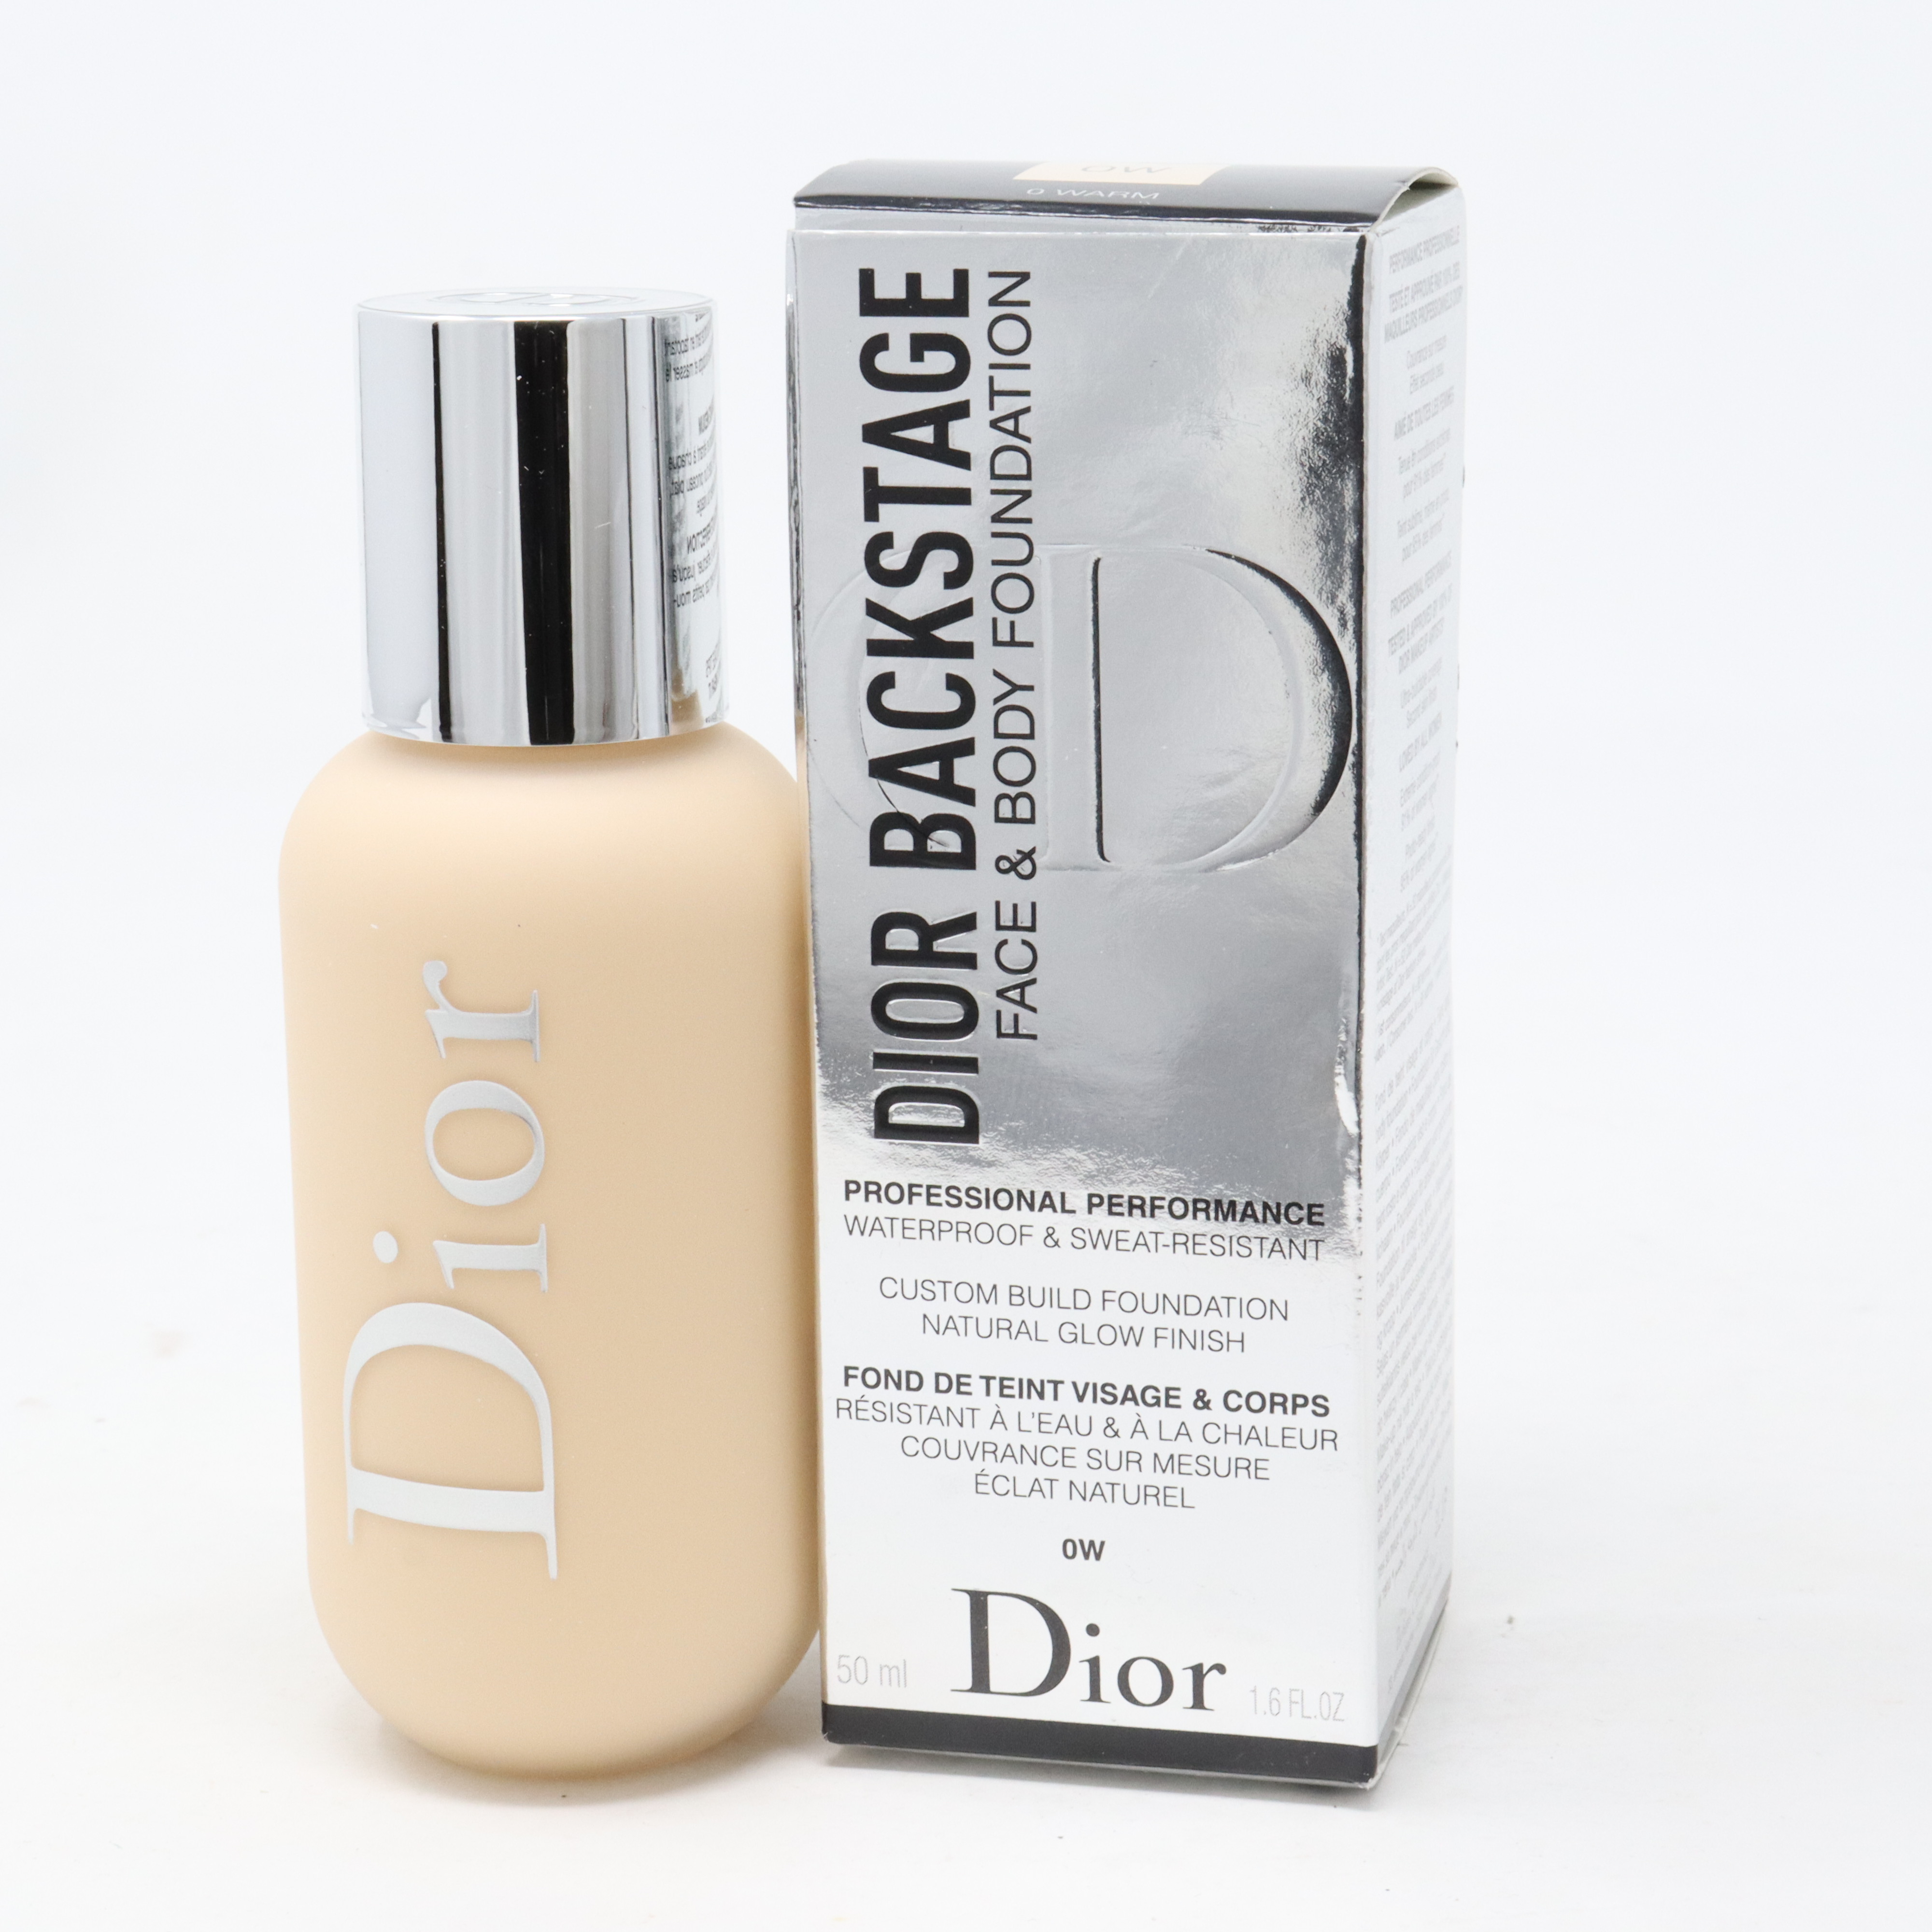 Dior Backstage Face & Body Foundation 1.6oz/50ml New With Box